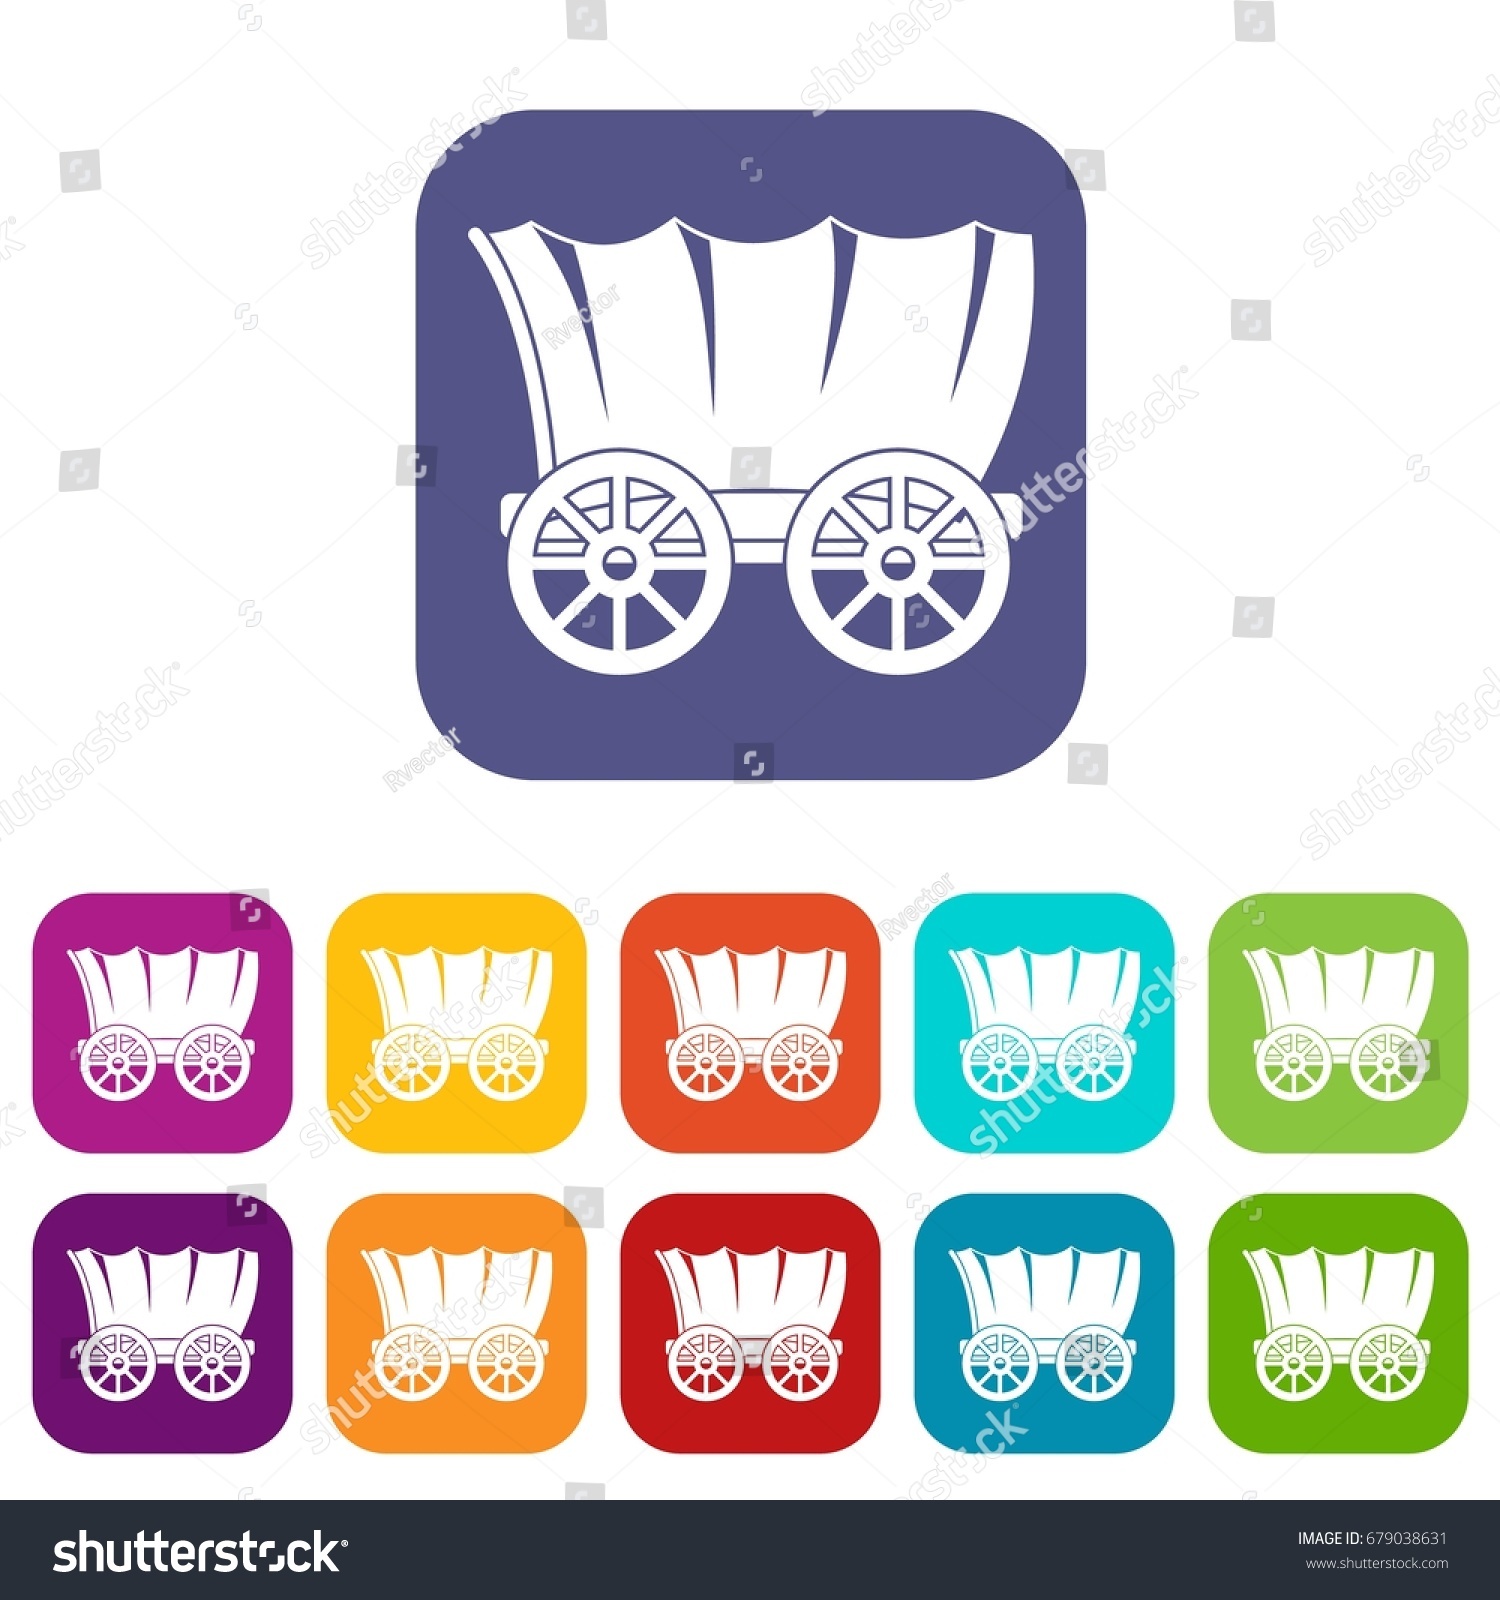 SVG of Pioneer covered wagon icons set vector. Illustration in flat style of pioneer covered wagon icons set in colors red, blue, green and other svg